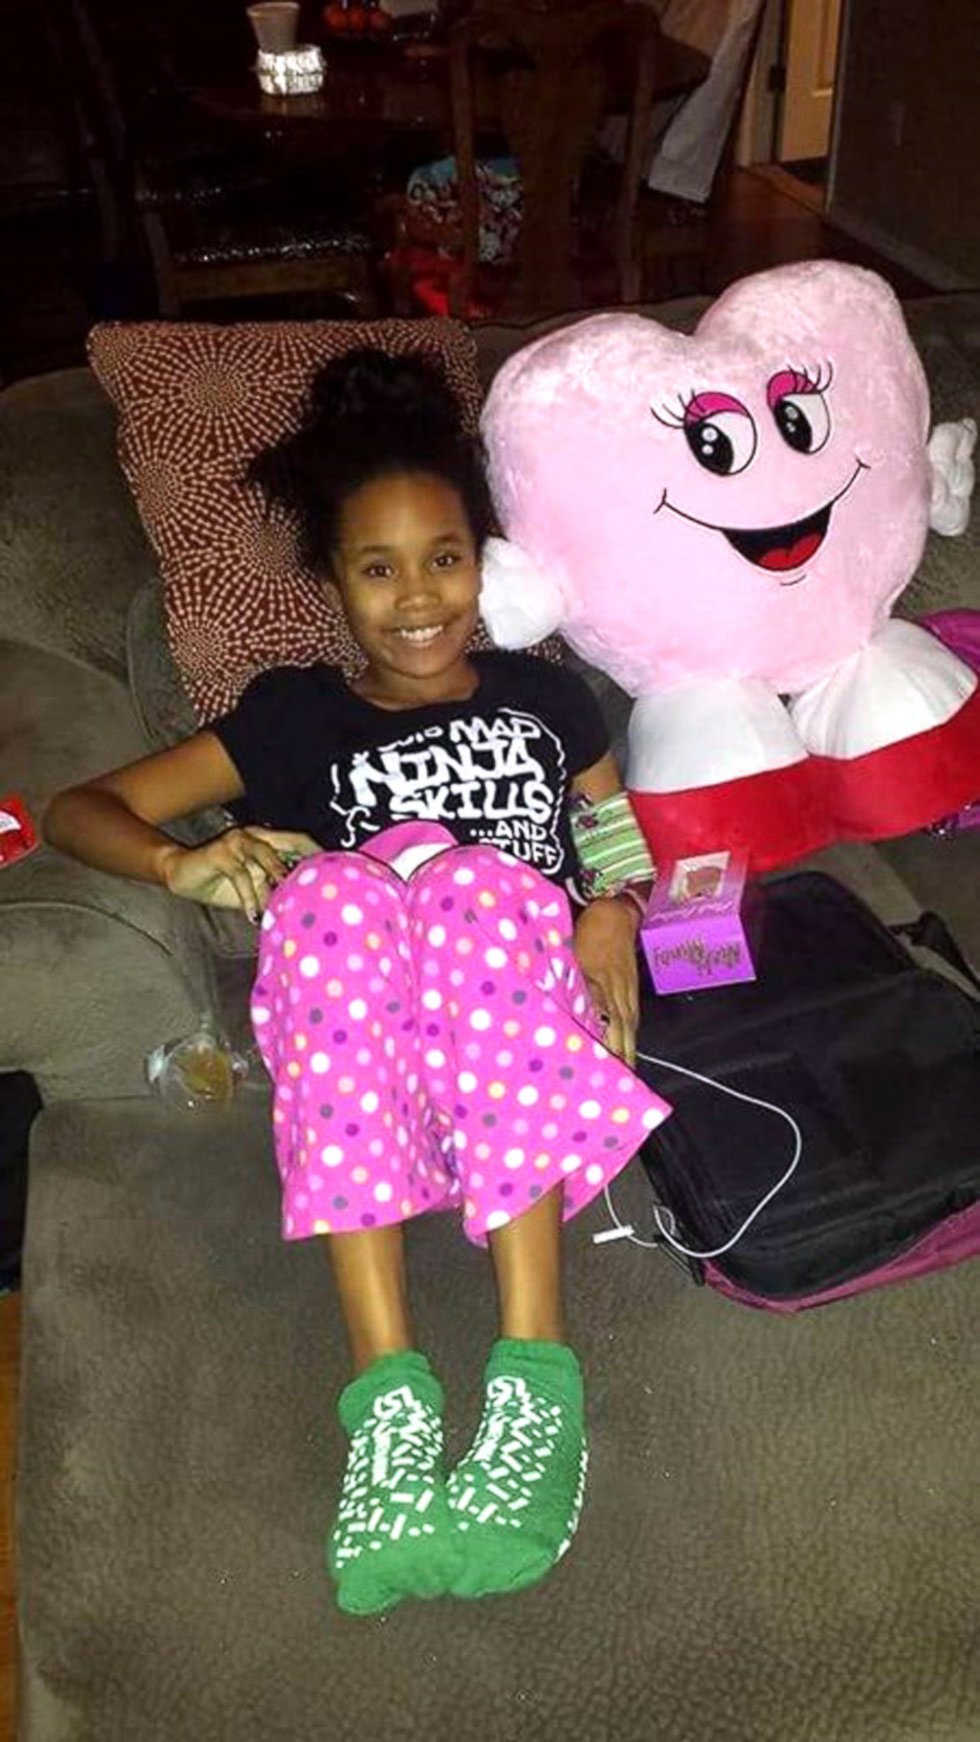 PHOTO: Journee left the hospital on Thursday and is now recovering at home.